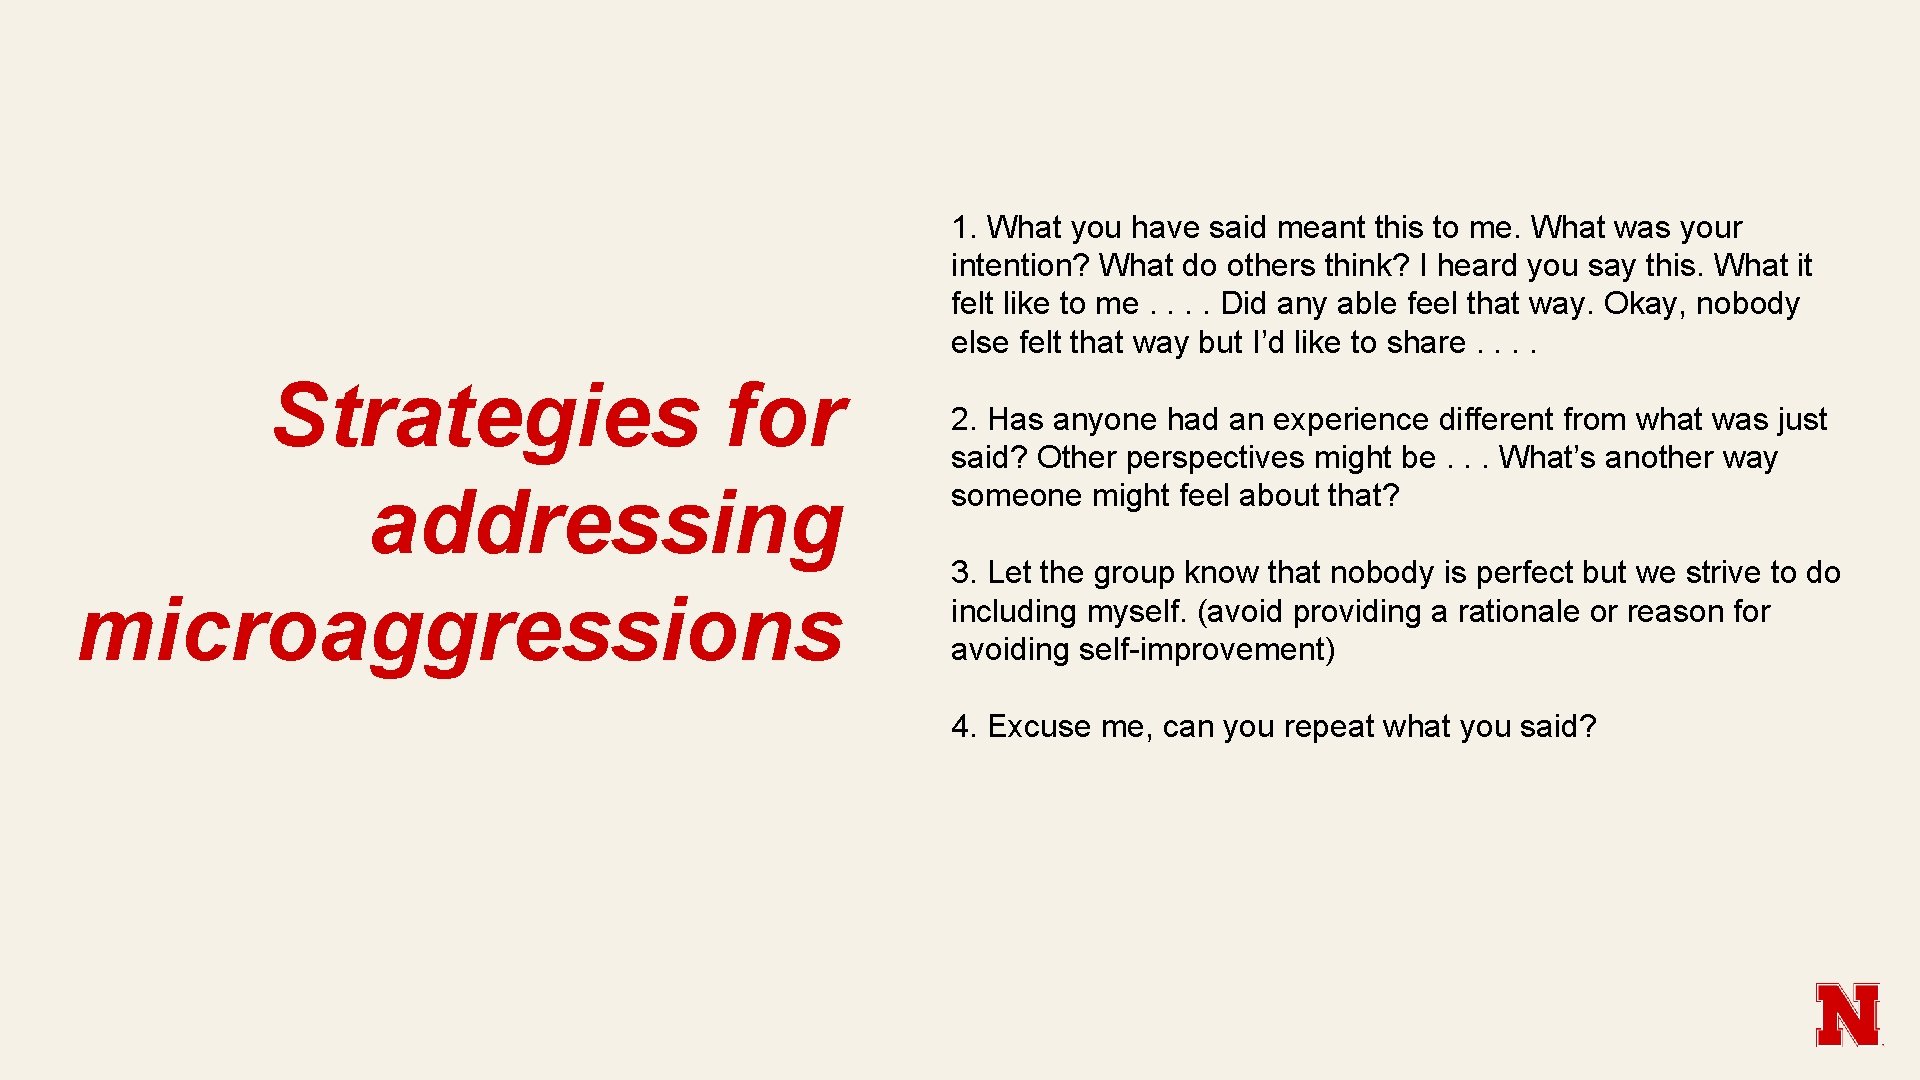 Strategies for addressing microaggressions 1. What you have said meant this to me. What